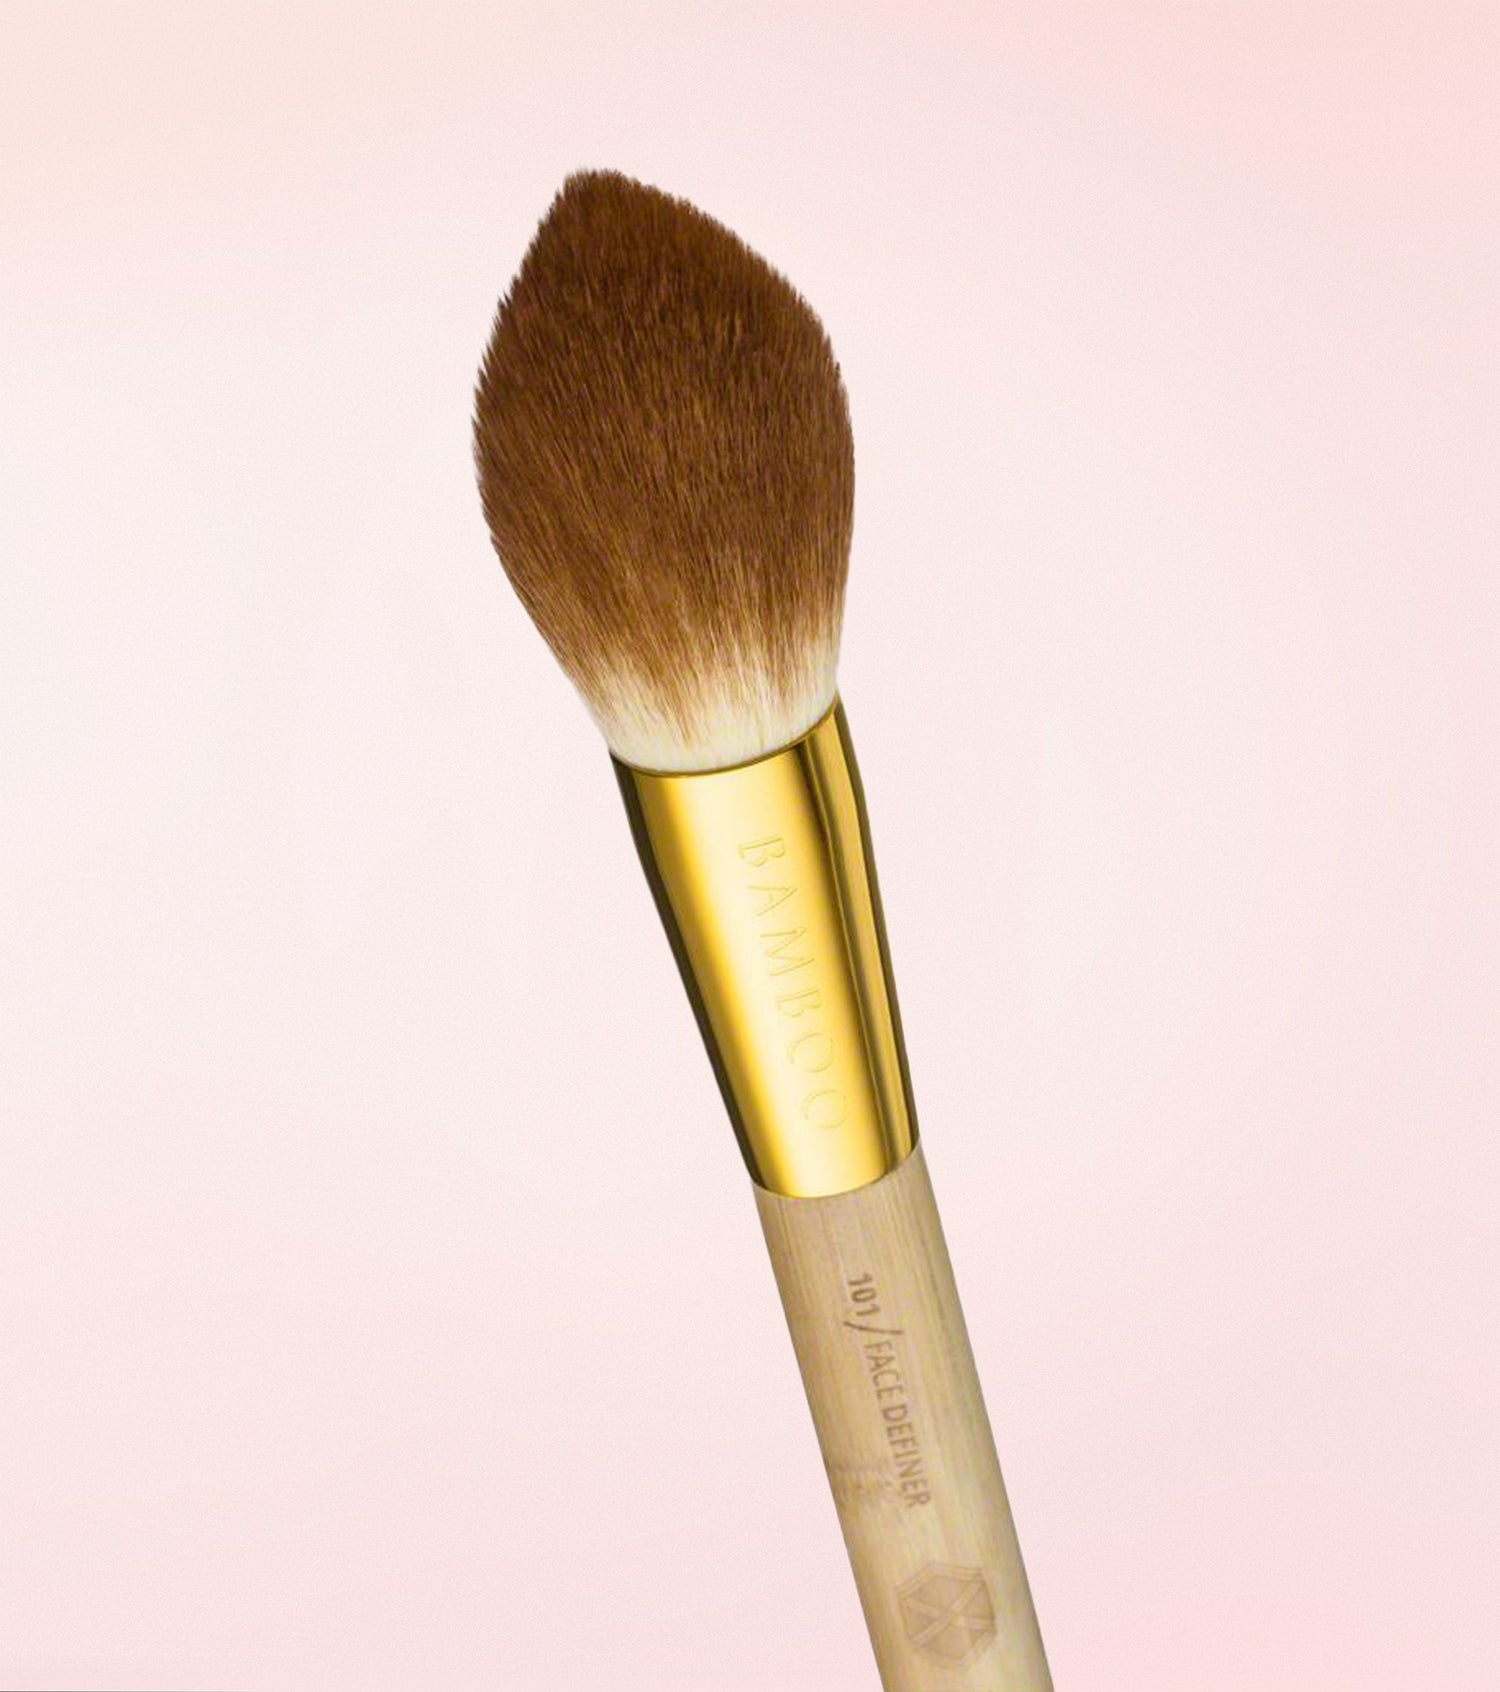 101 Face Definer Brush (Bamboo Vol. 2) Main Image featured